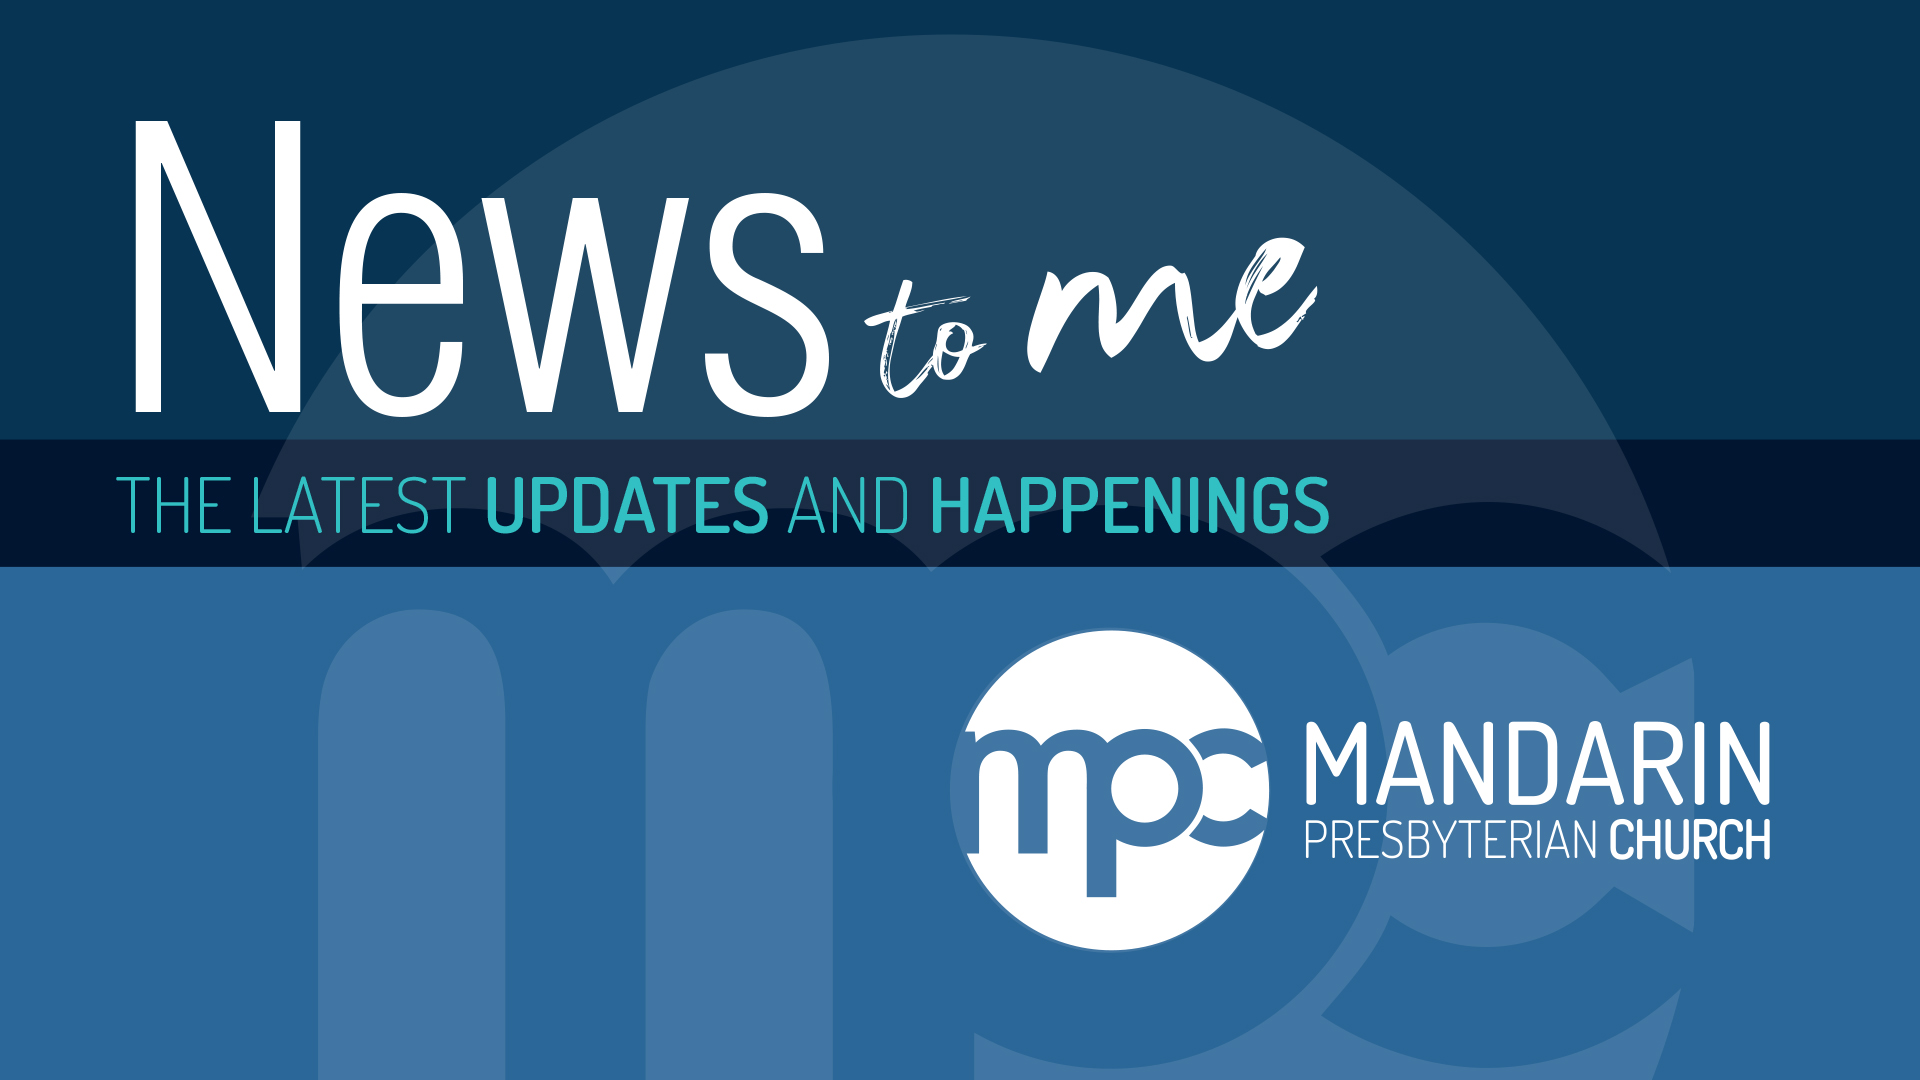 Get our MPC E-mail Newsletter!

You can sign up for our weekly e-news, 'MPC News to Me!'
